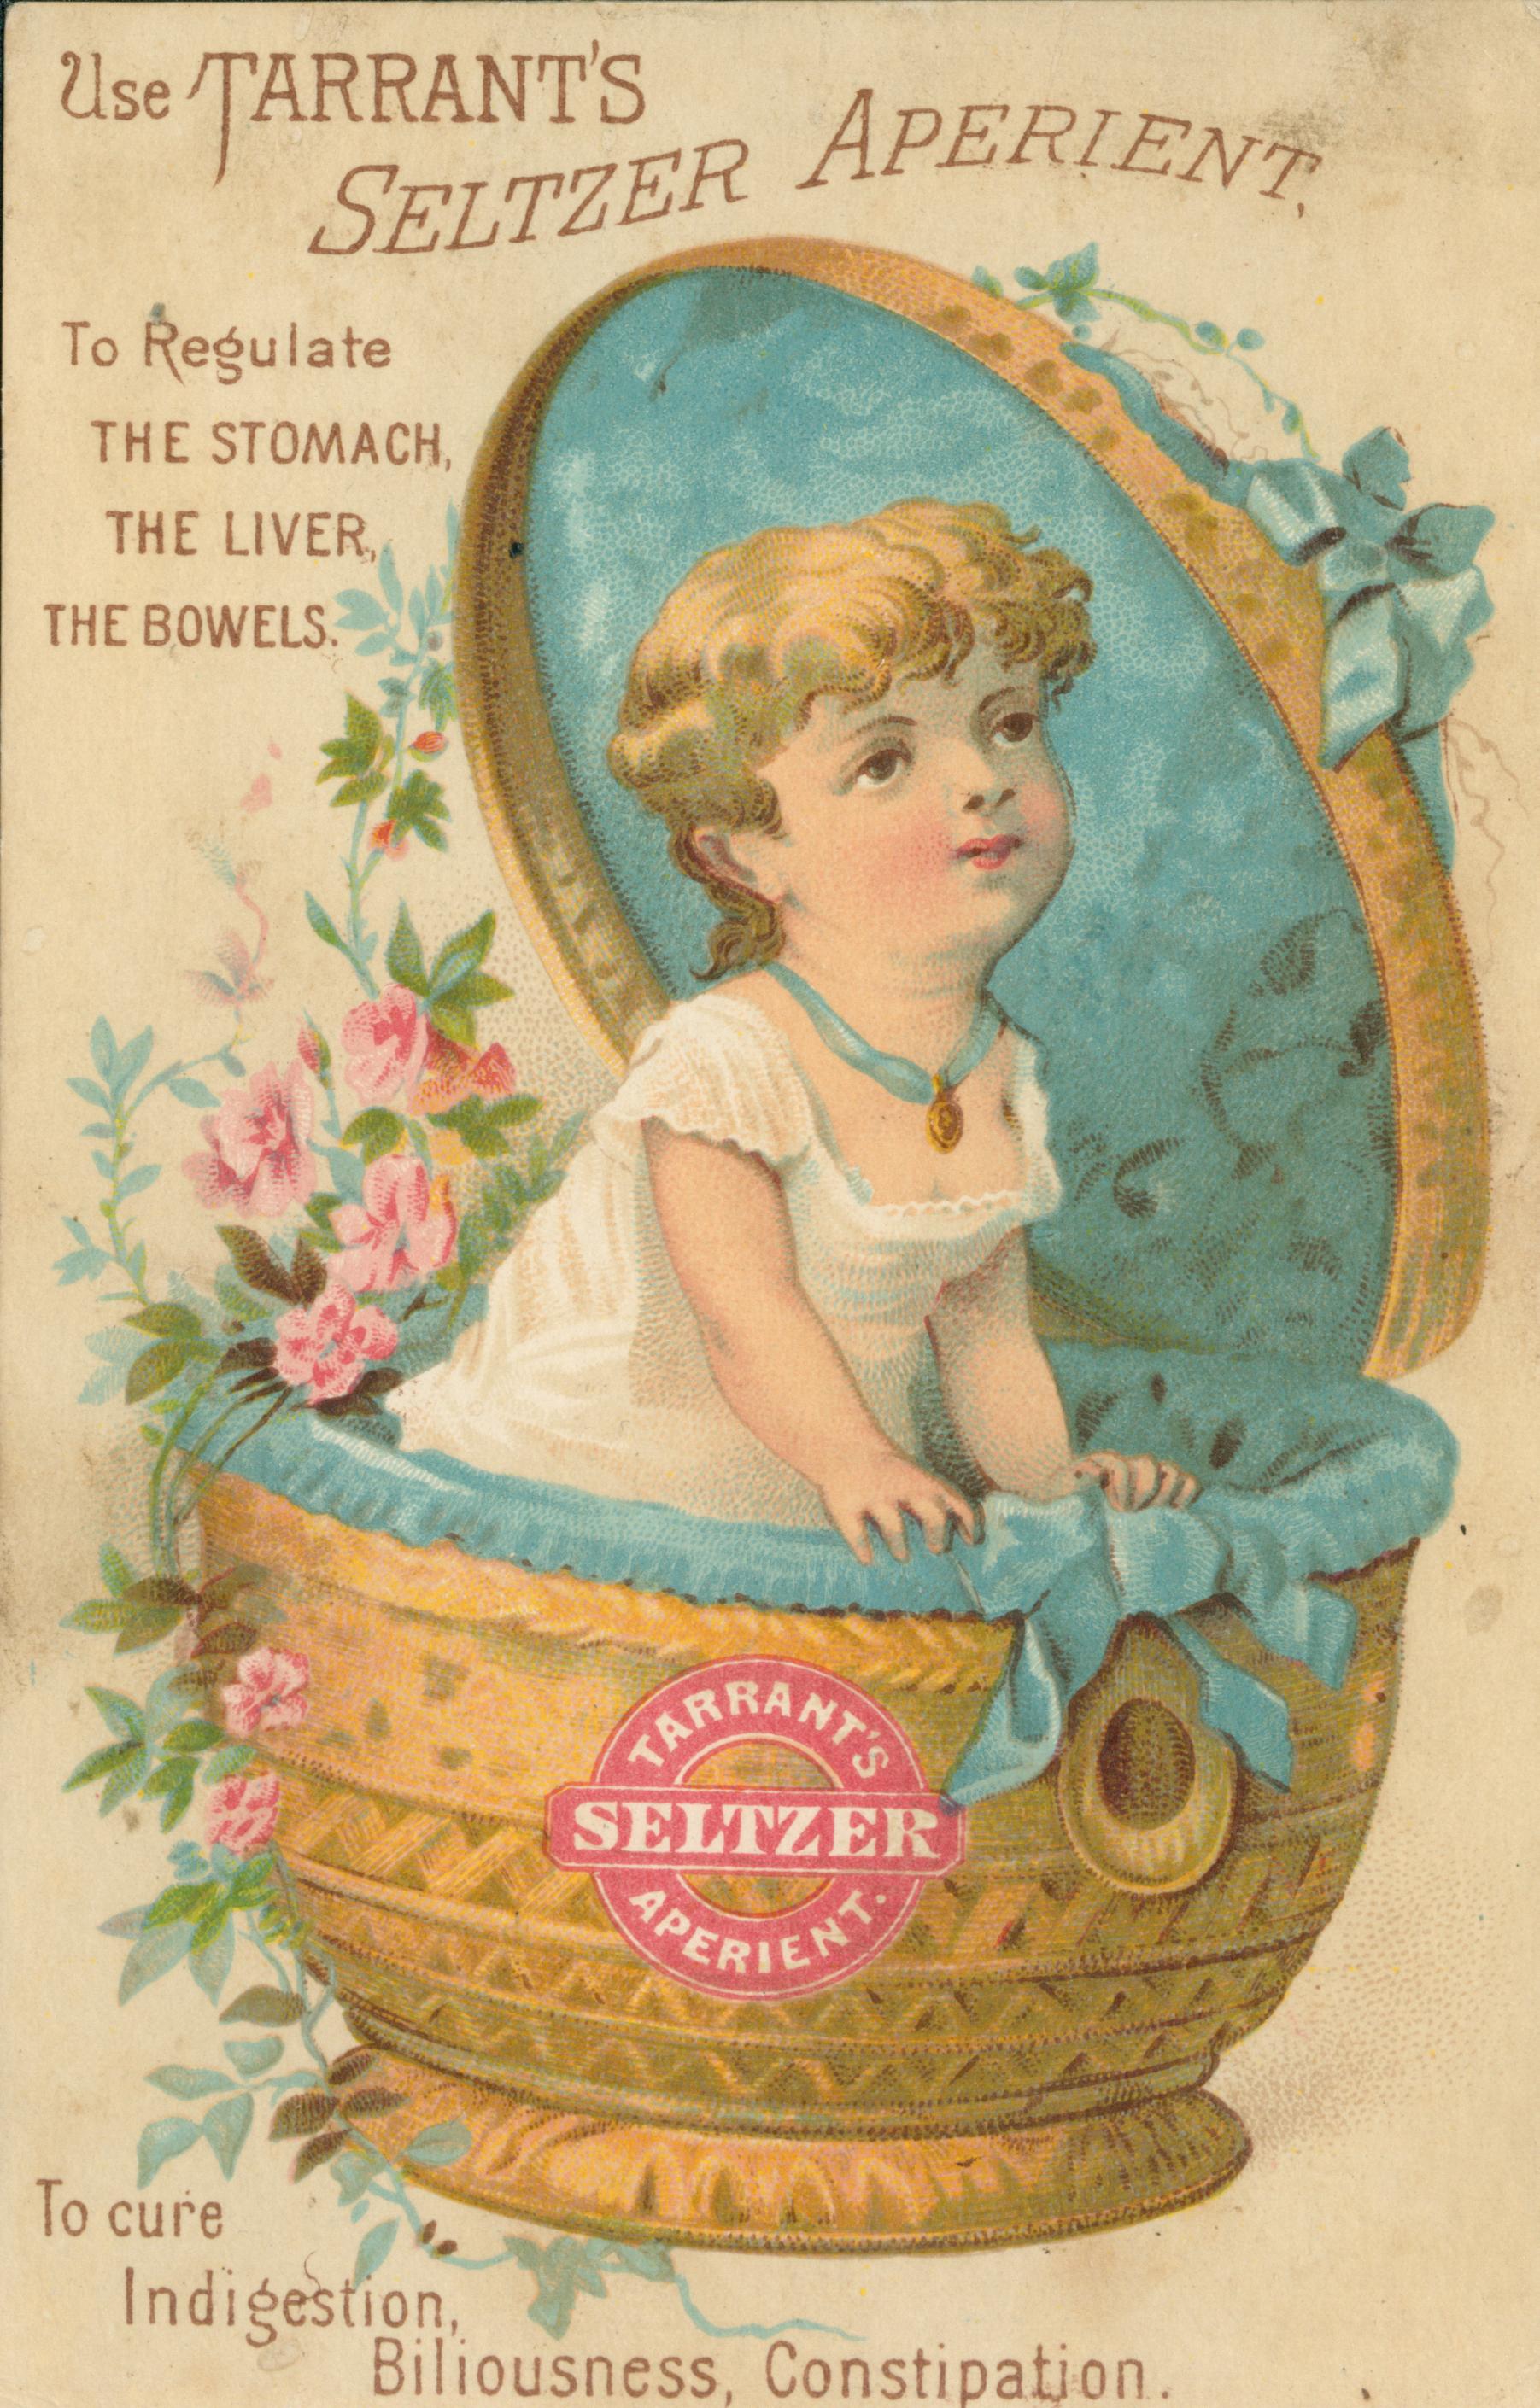 This trade card shows a child searted in a basked lined with blue fabric. Information about Taran's Seltzer Aperient is above and below the image.